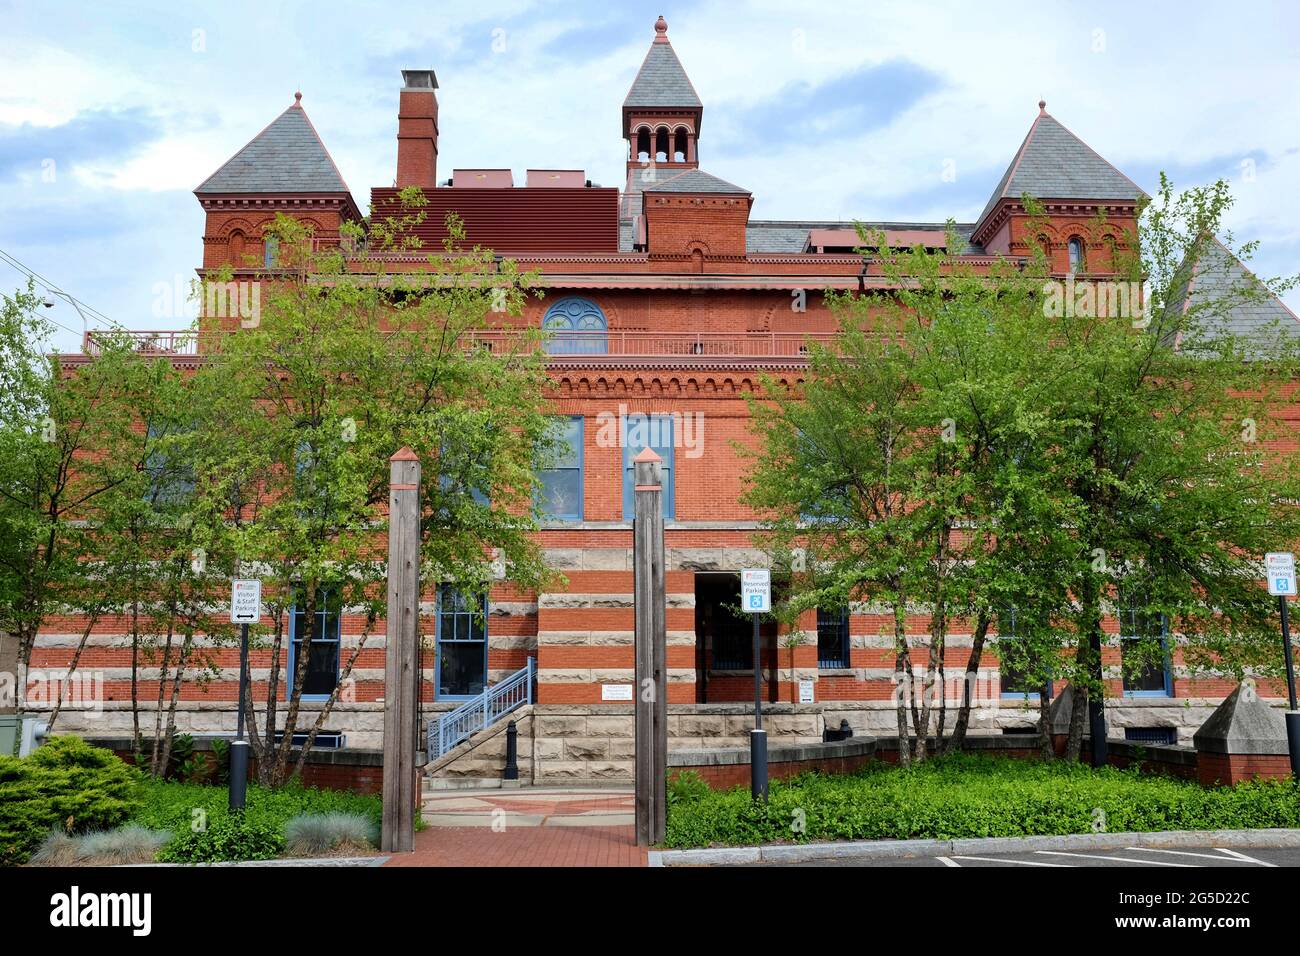 CORNING, NEW YORK - 18 JUNE 2021: The Rockwell Museum a Smithsonian Affiliate, features 19th and 20th century paintings, illustration art and contempo Stock Photo